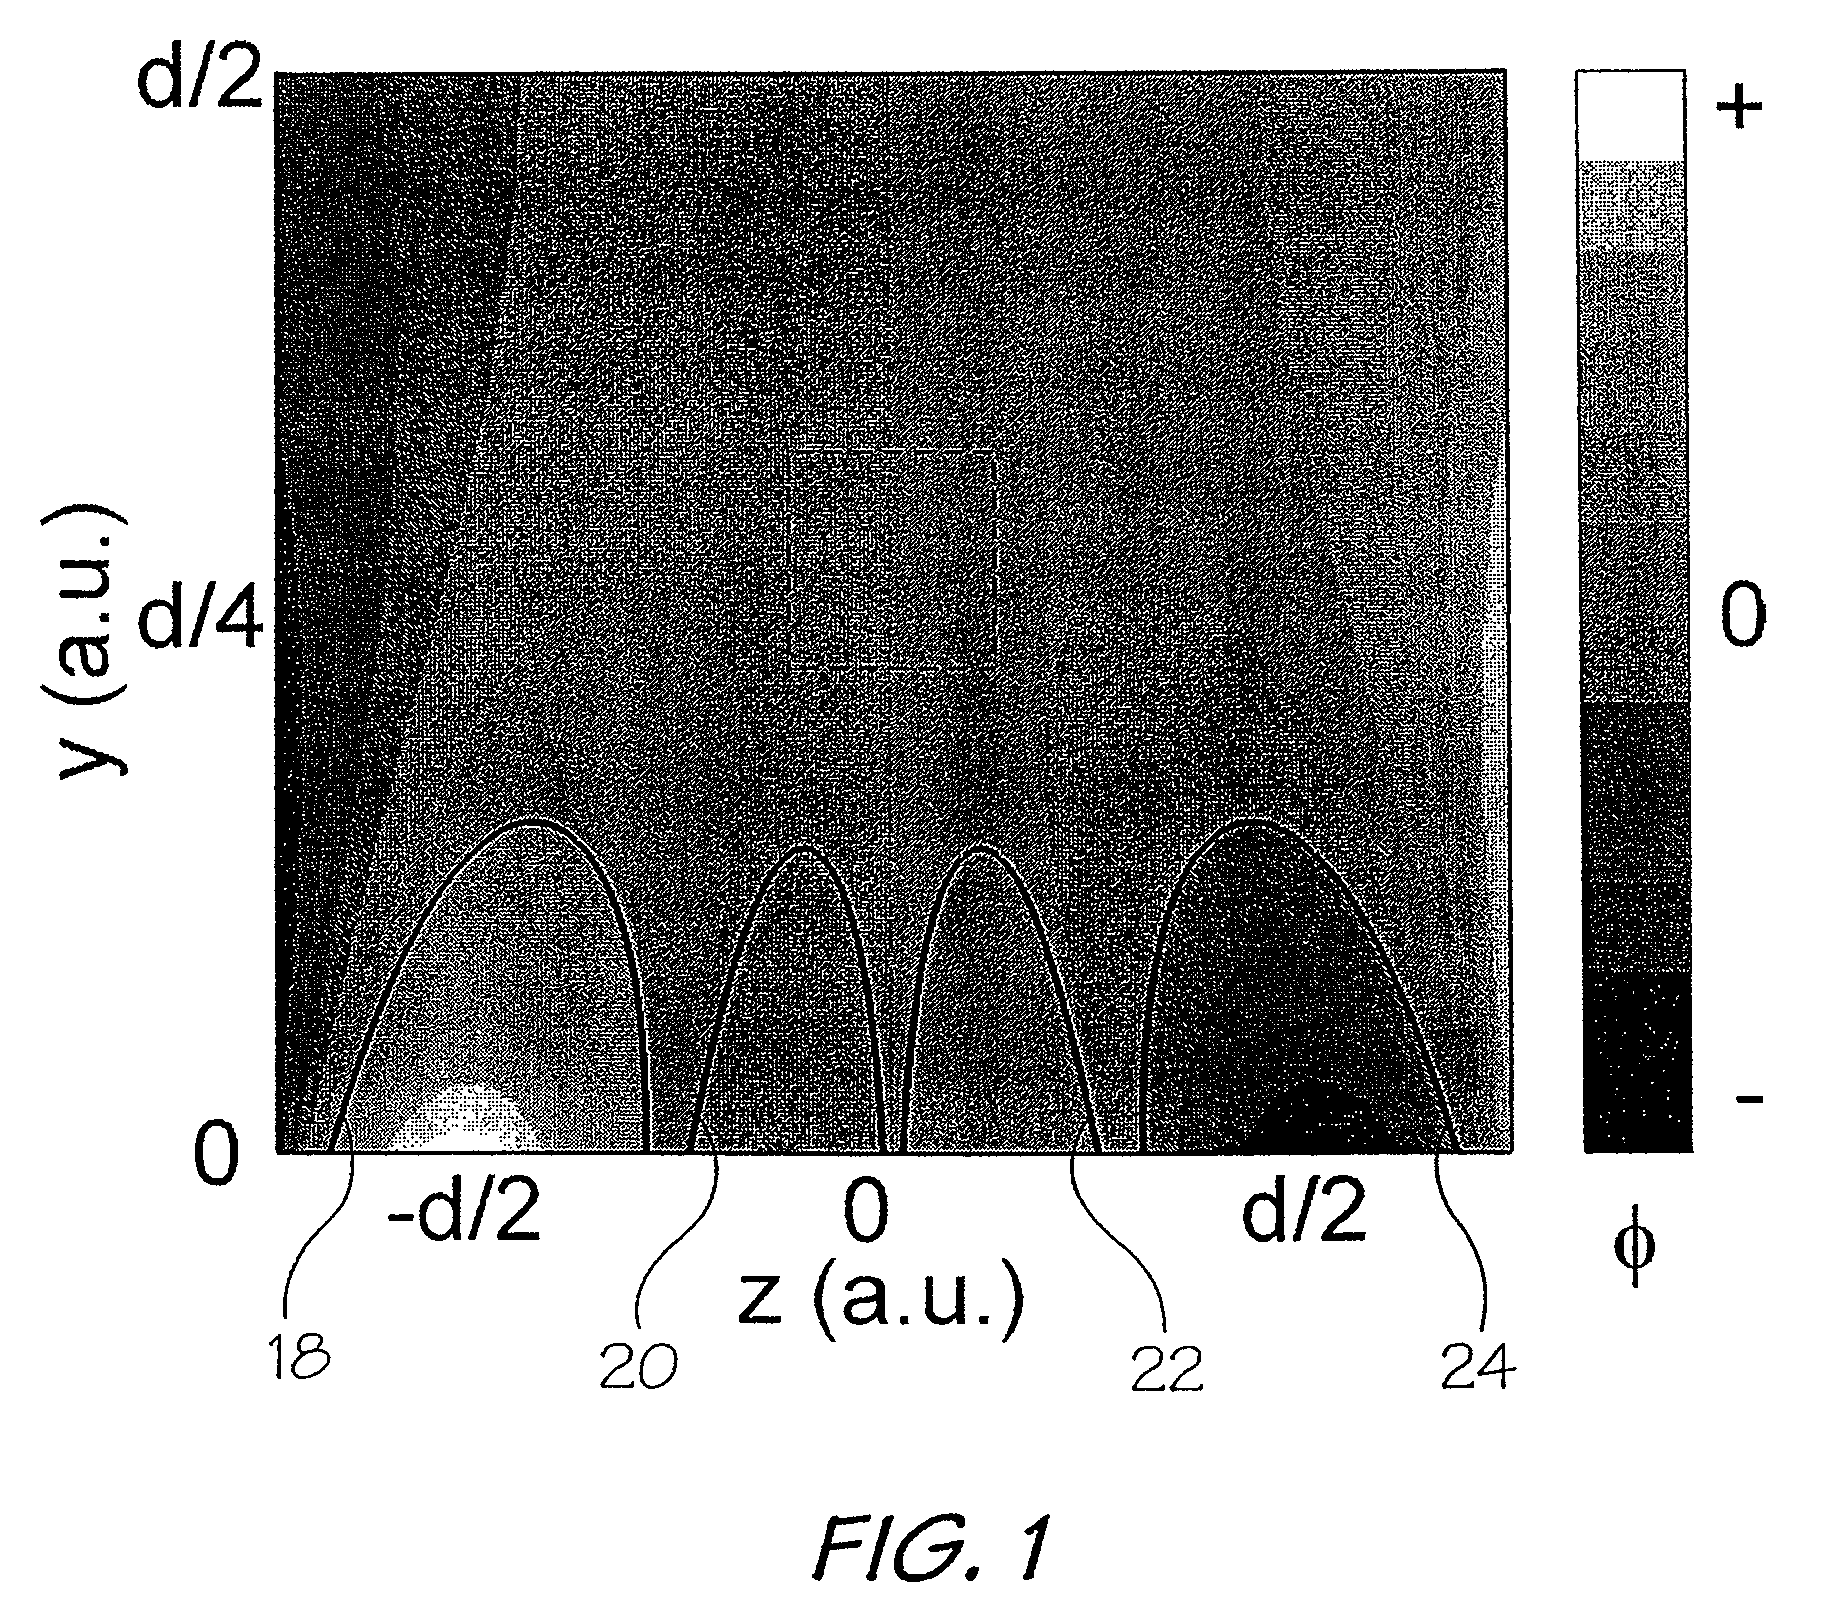 Magnetic field generator suitable for unilateral nuclear magnetic resonance and method for making same